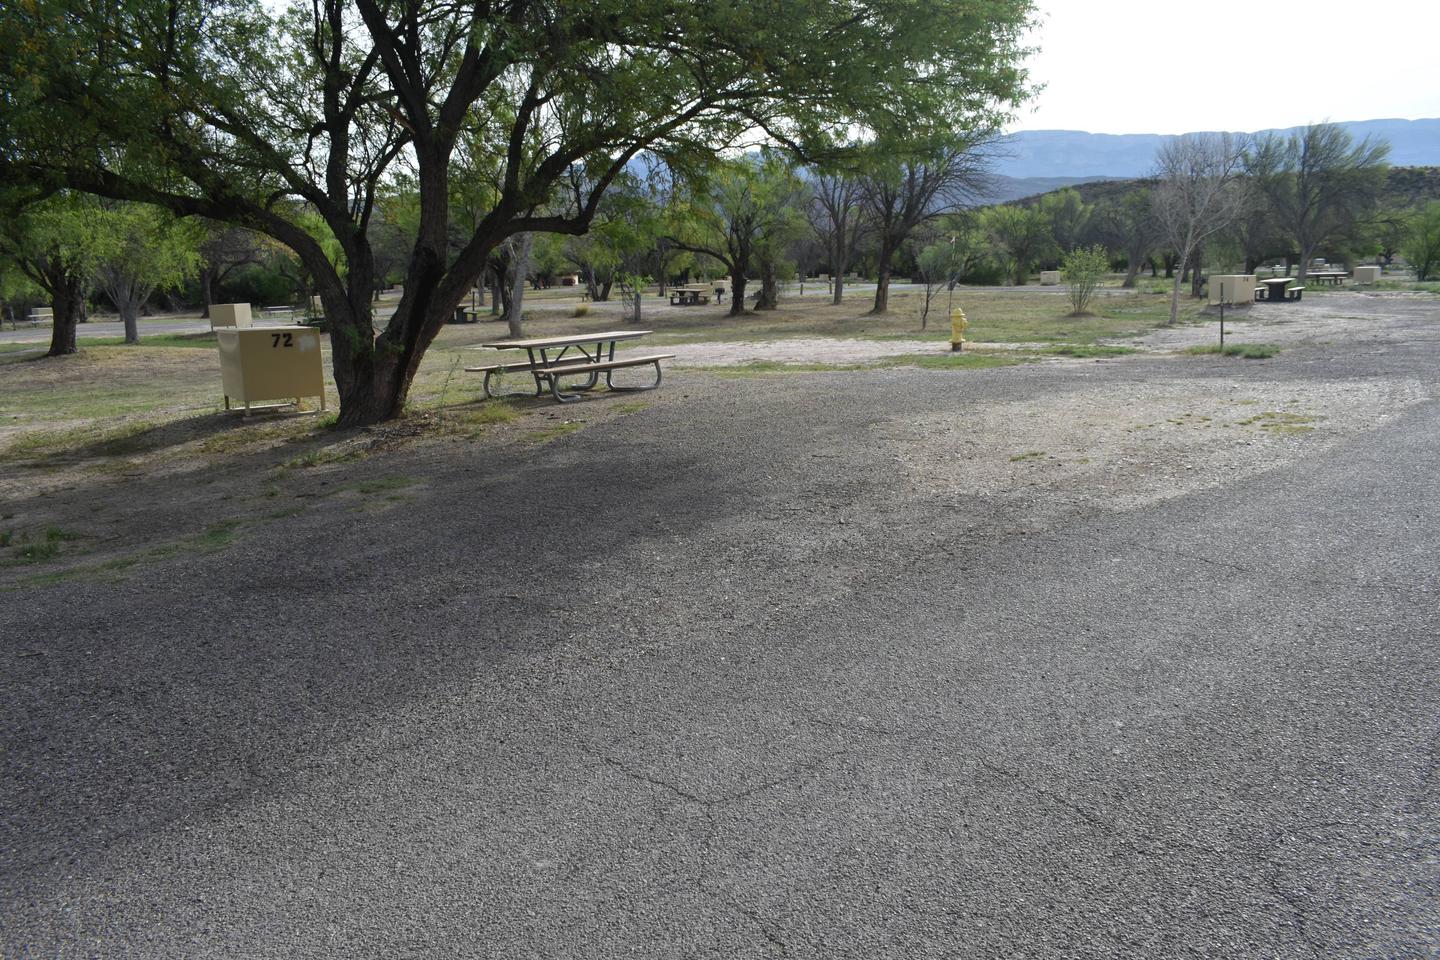 Distant view of pull-thru parking area and camp siteParking and camping area Site 72